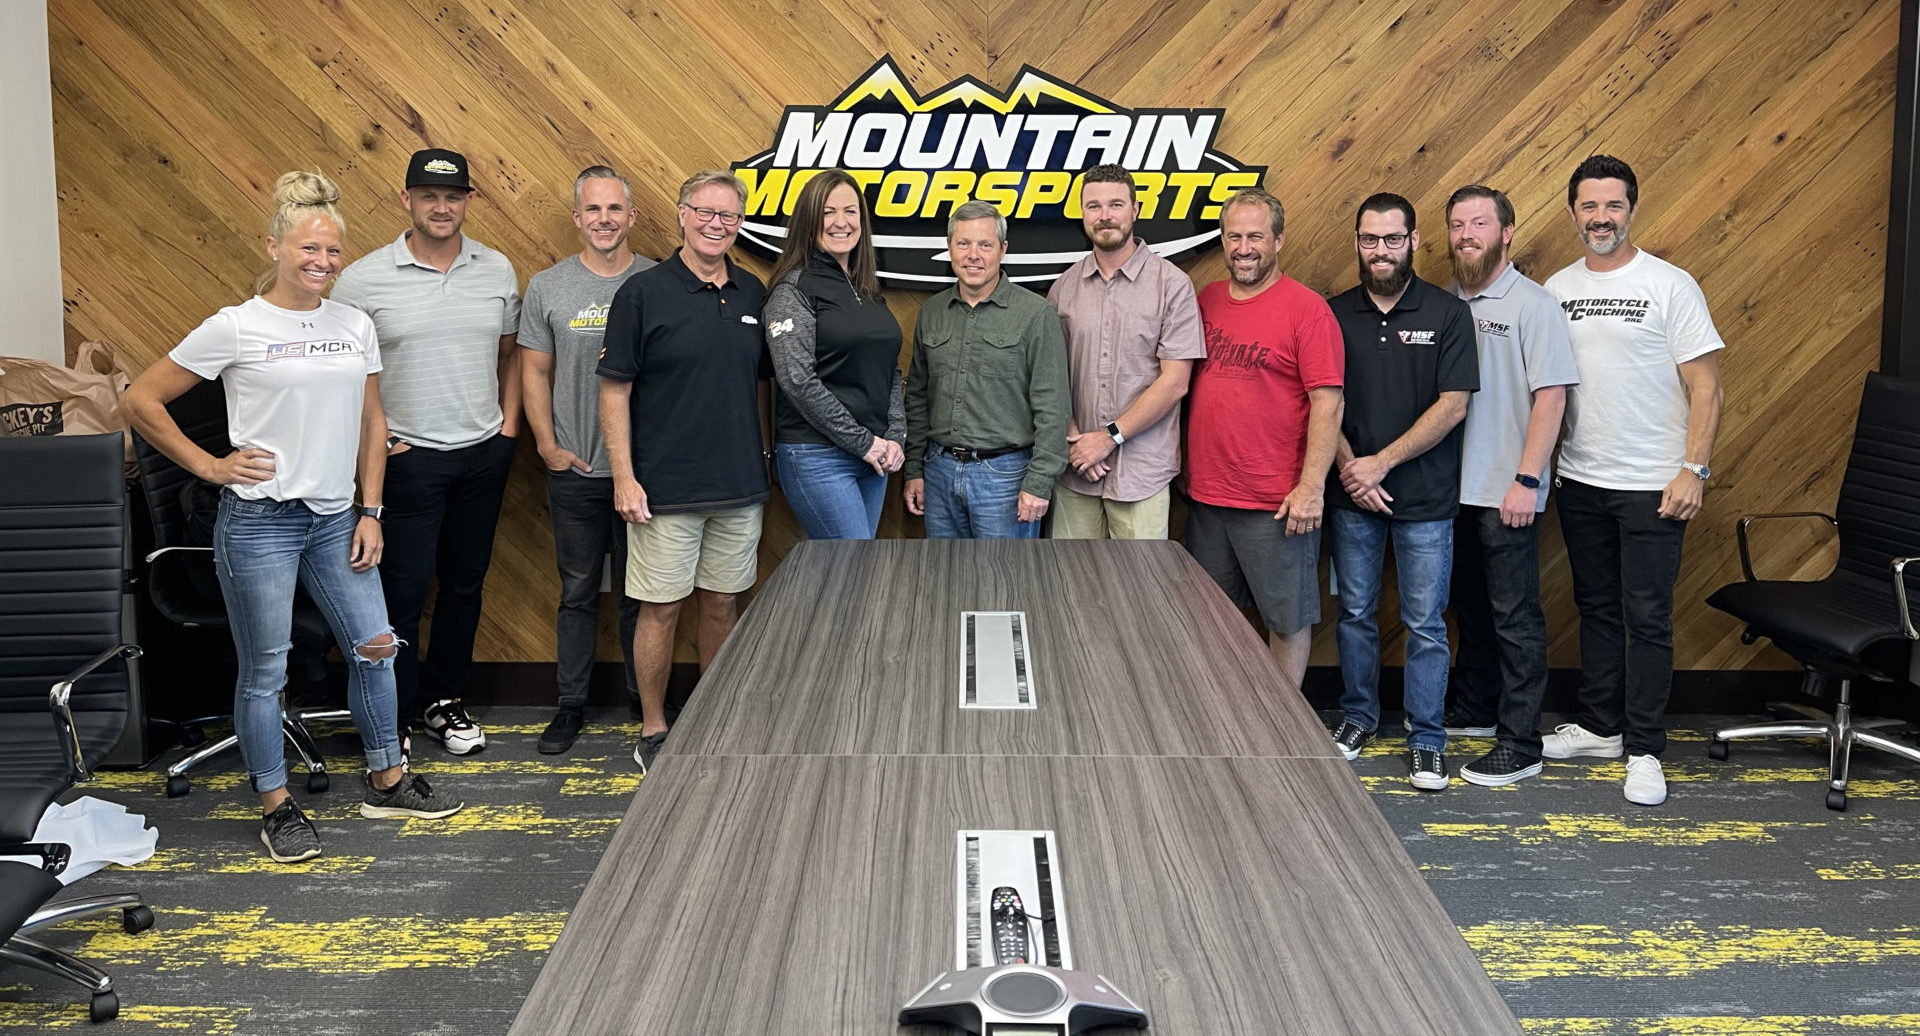 USMCA Executive Director Lindsey Scheltema (far left) with Mountain Motorsports personnel and rider coaches from the Georgia area. Photo courtesy USMCA.